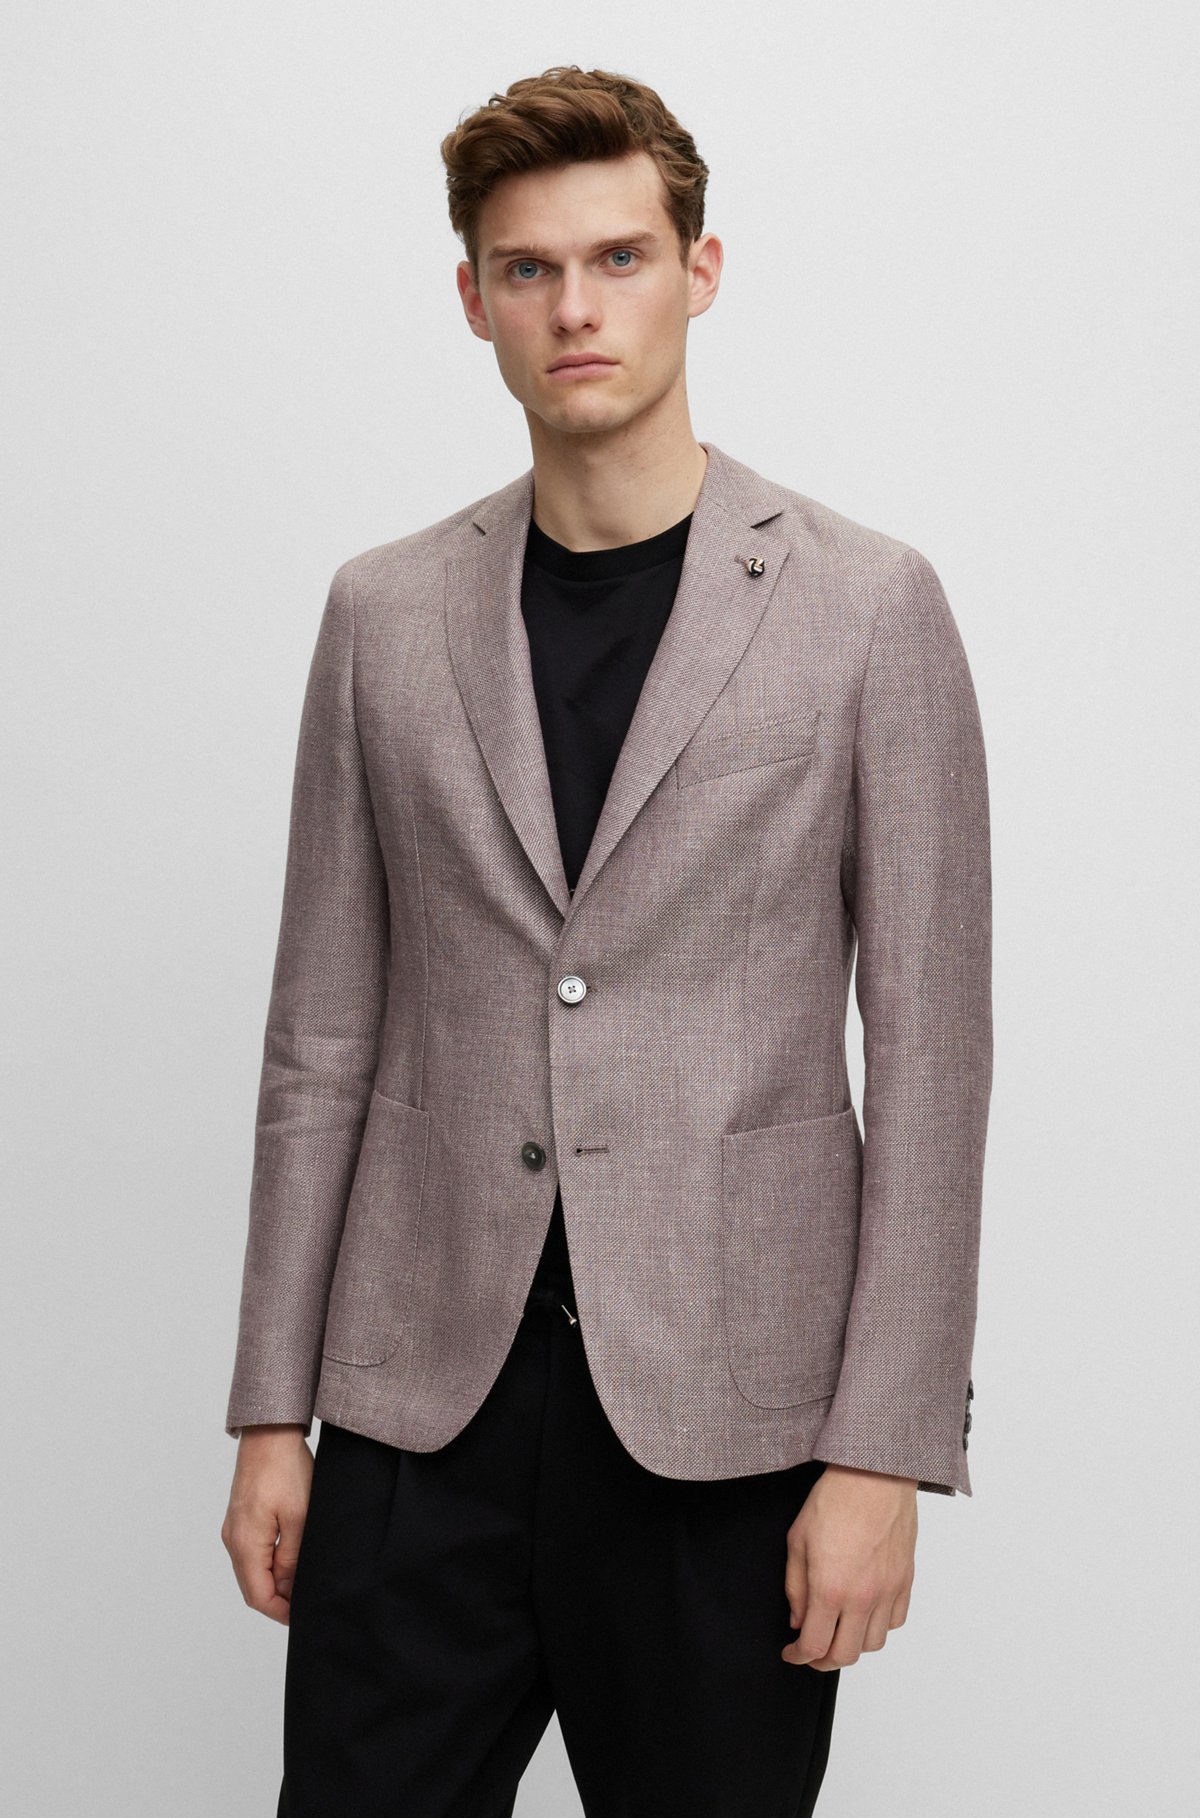 Slim-fit jacket in micro-patterned linen and wool, Light Brown